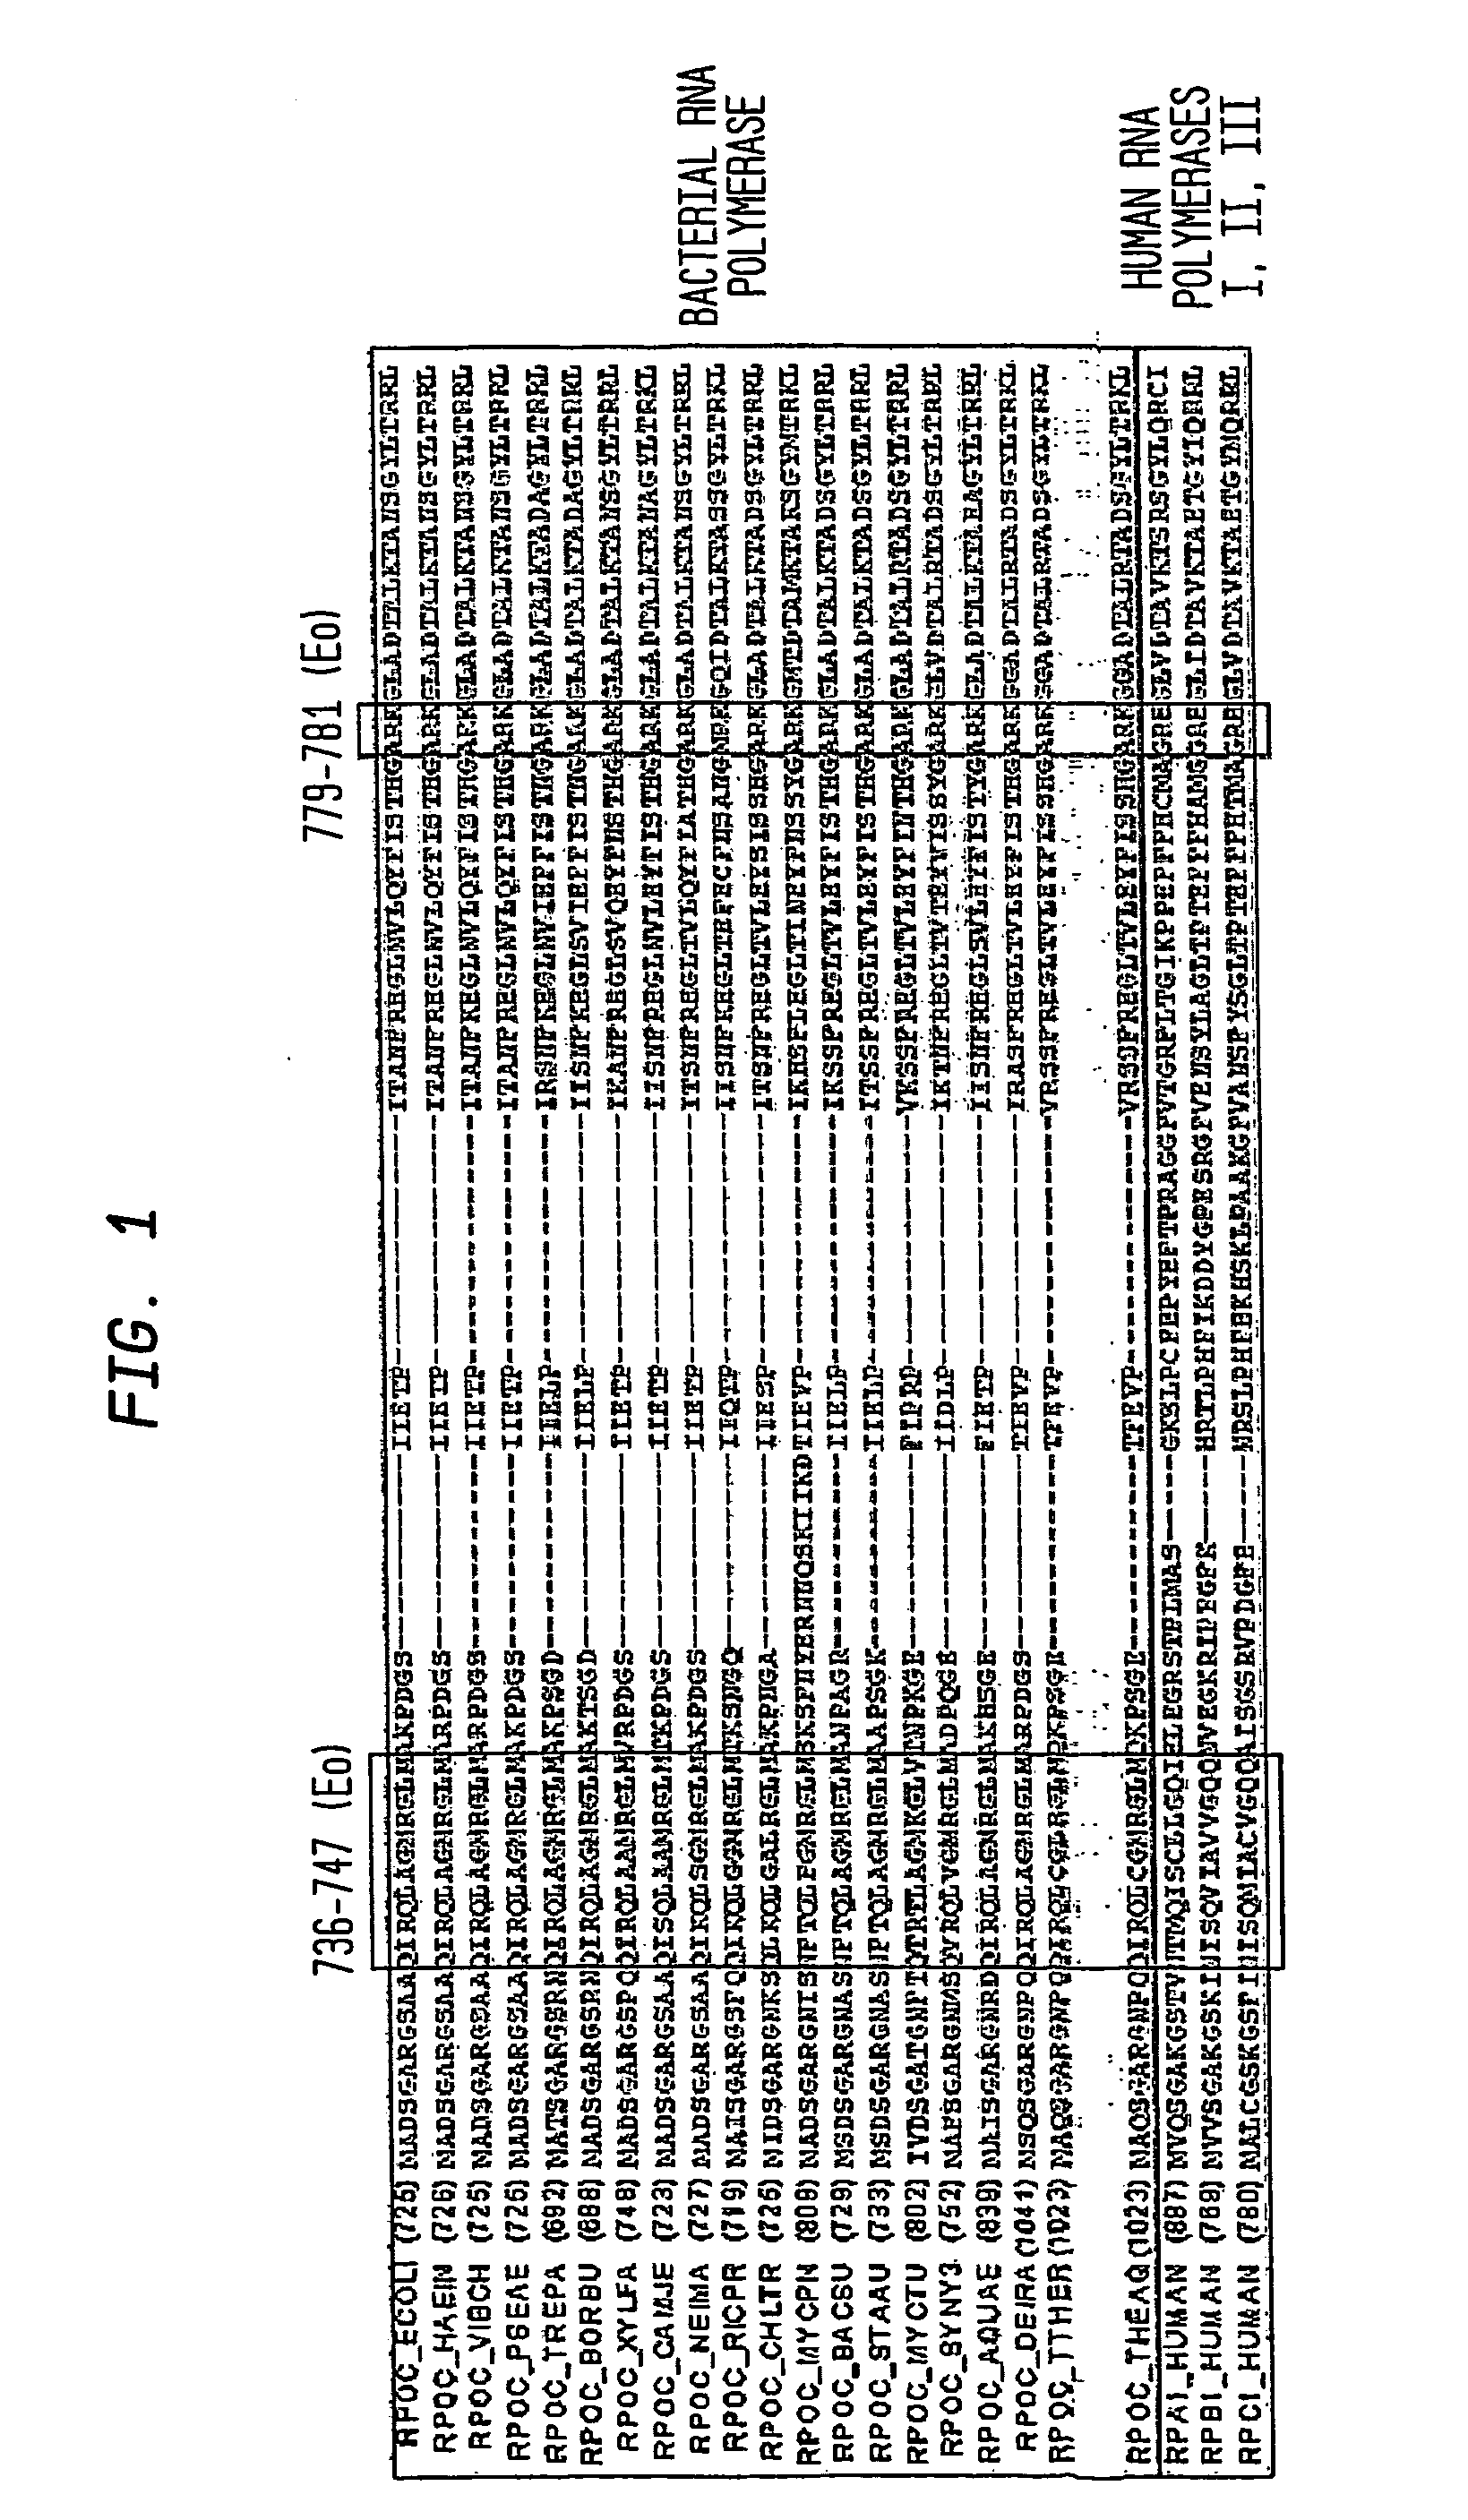 Target And Method For Inhibition Of Bacterial Rna Polymerase Minimized Derivatives Of Peptide Antibiotic Mccj25